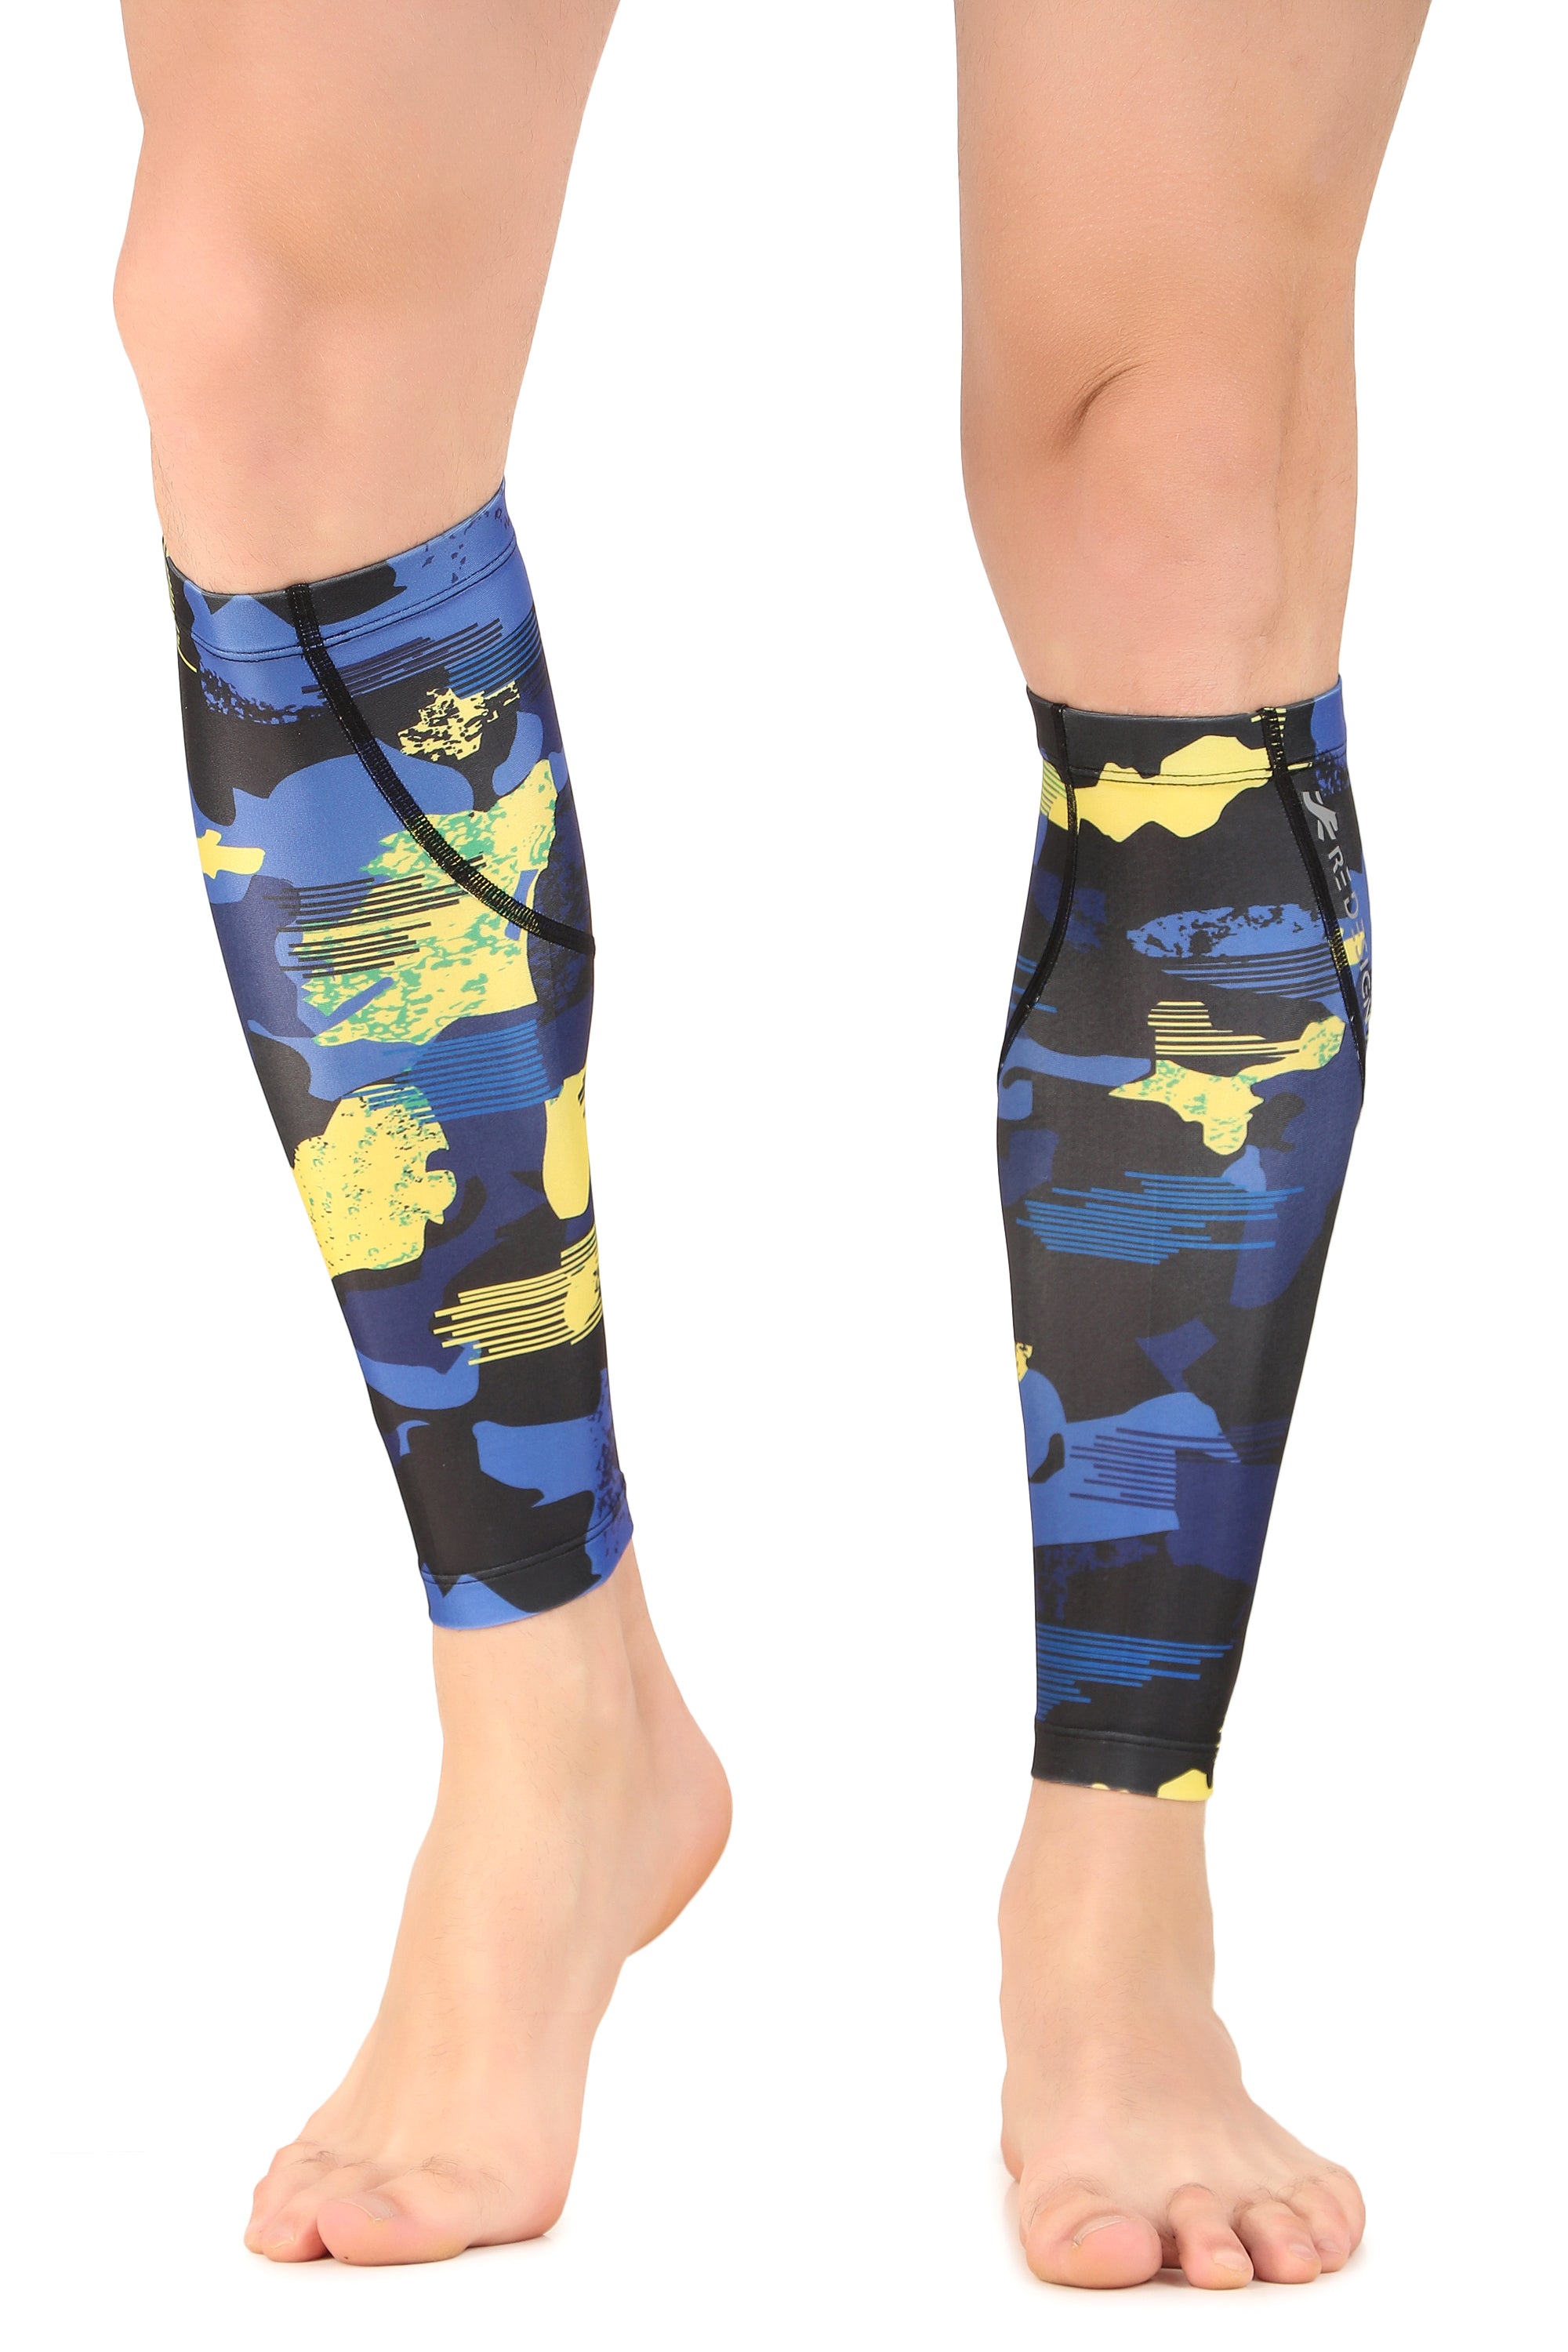 Polyester Compression Calf Sleeves (Blue Camo)